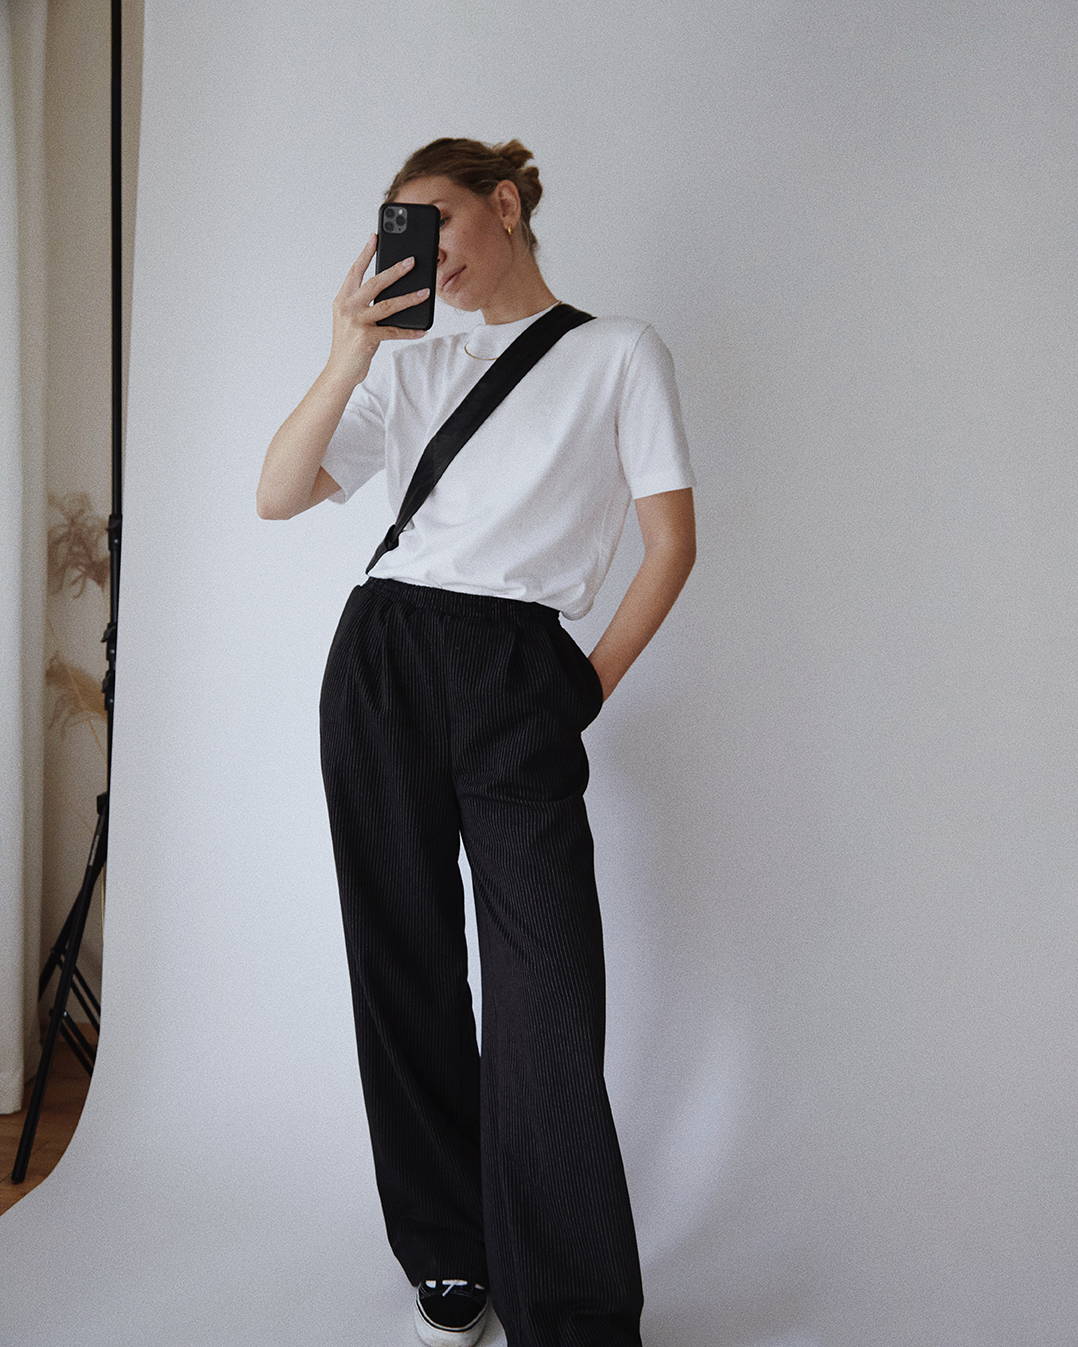 By Maren videos are about minimalist concepts such as a capsule wardrobe